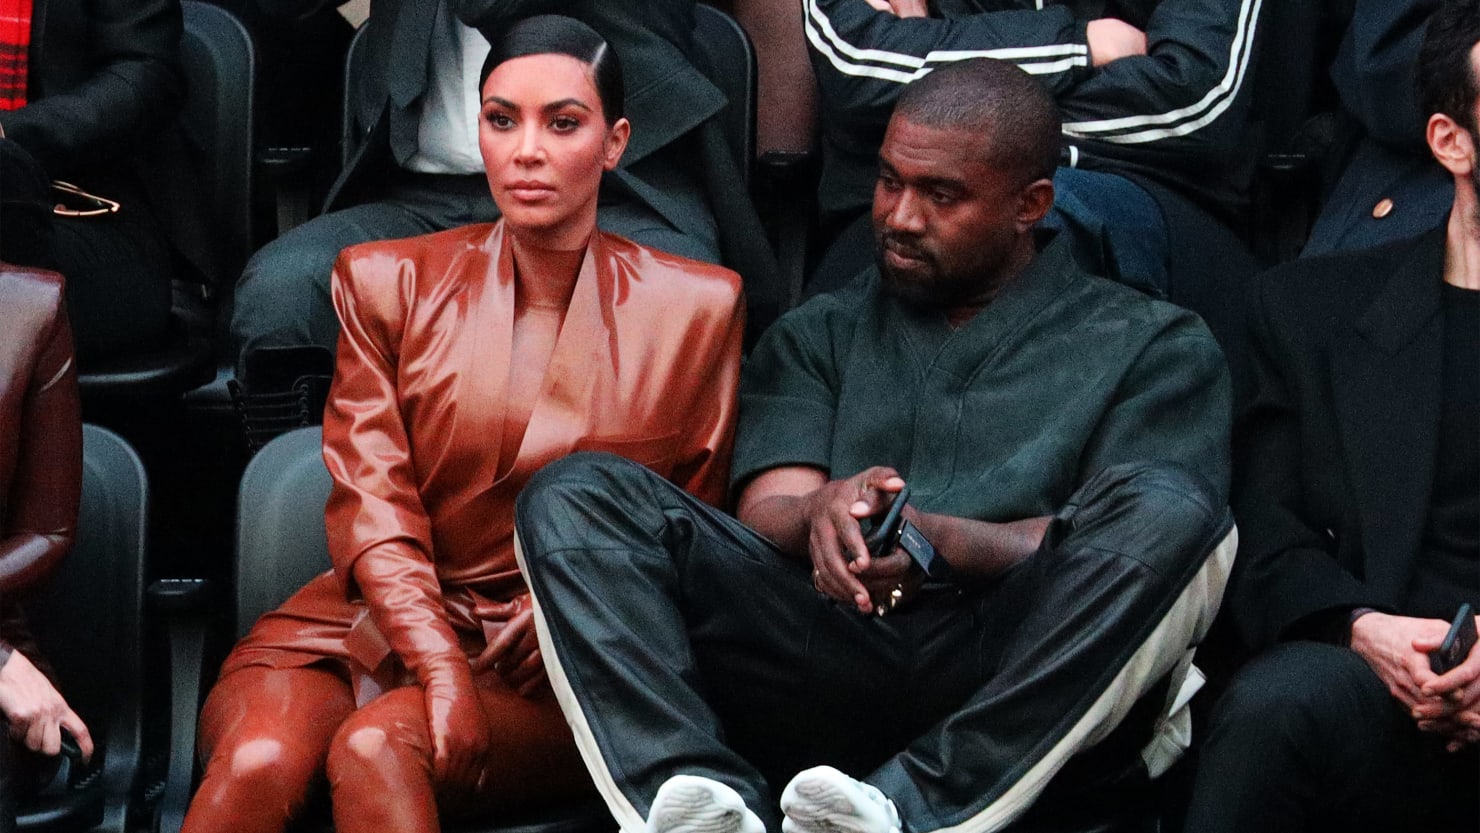 The curious moment of Kim Kardashian’s divorce from Kanye West